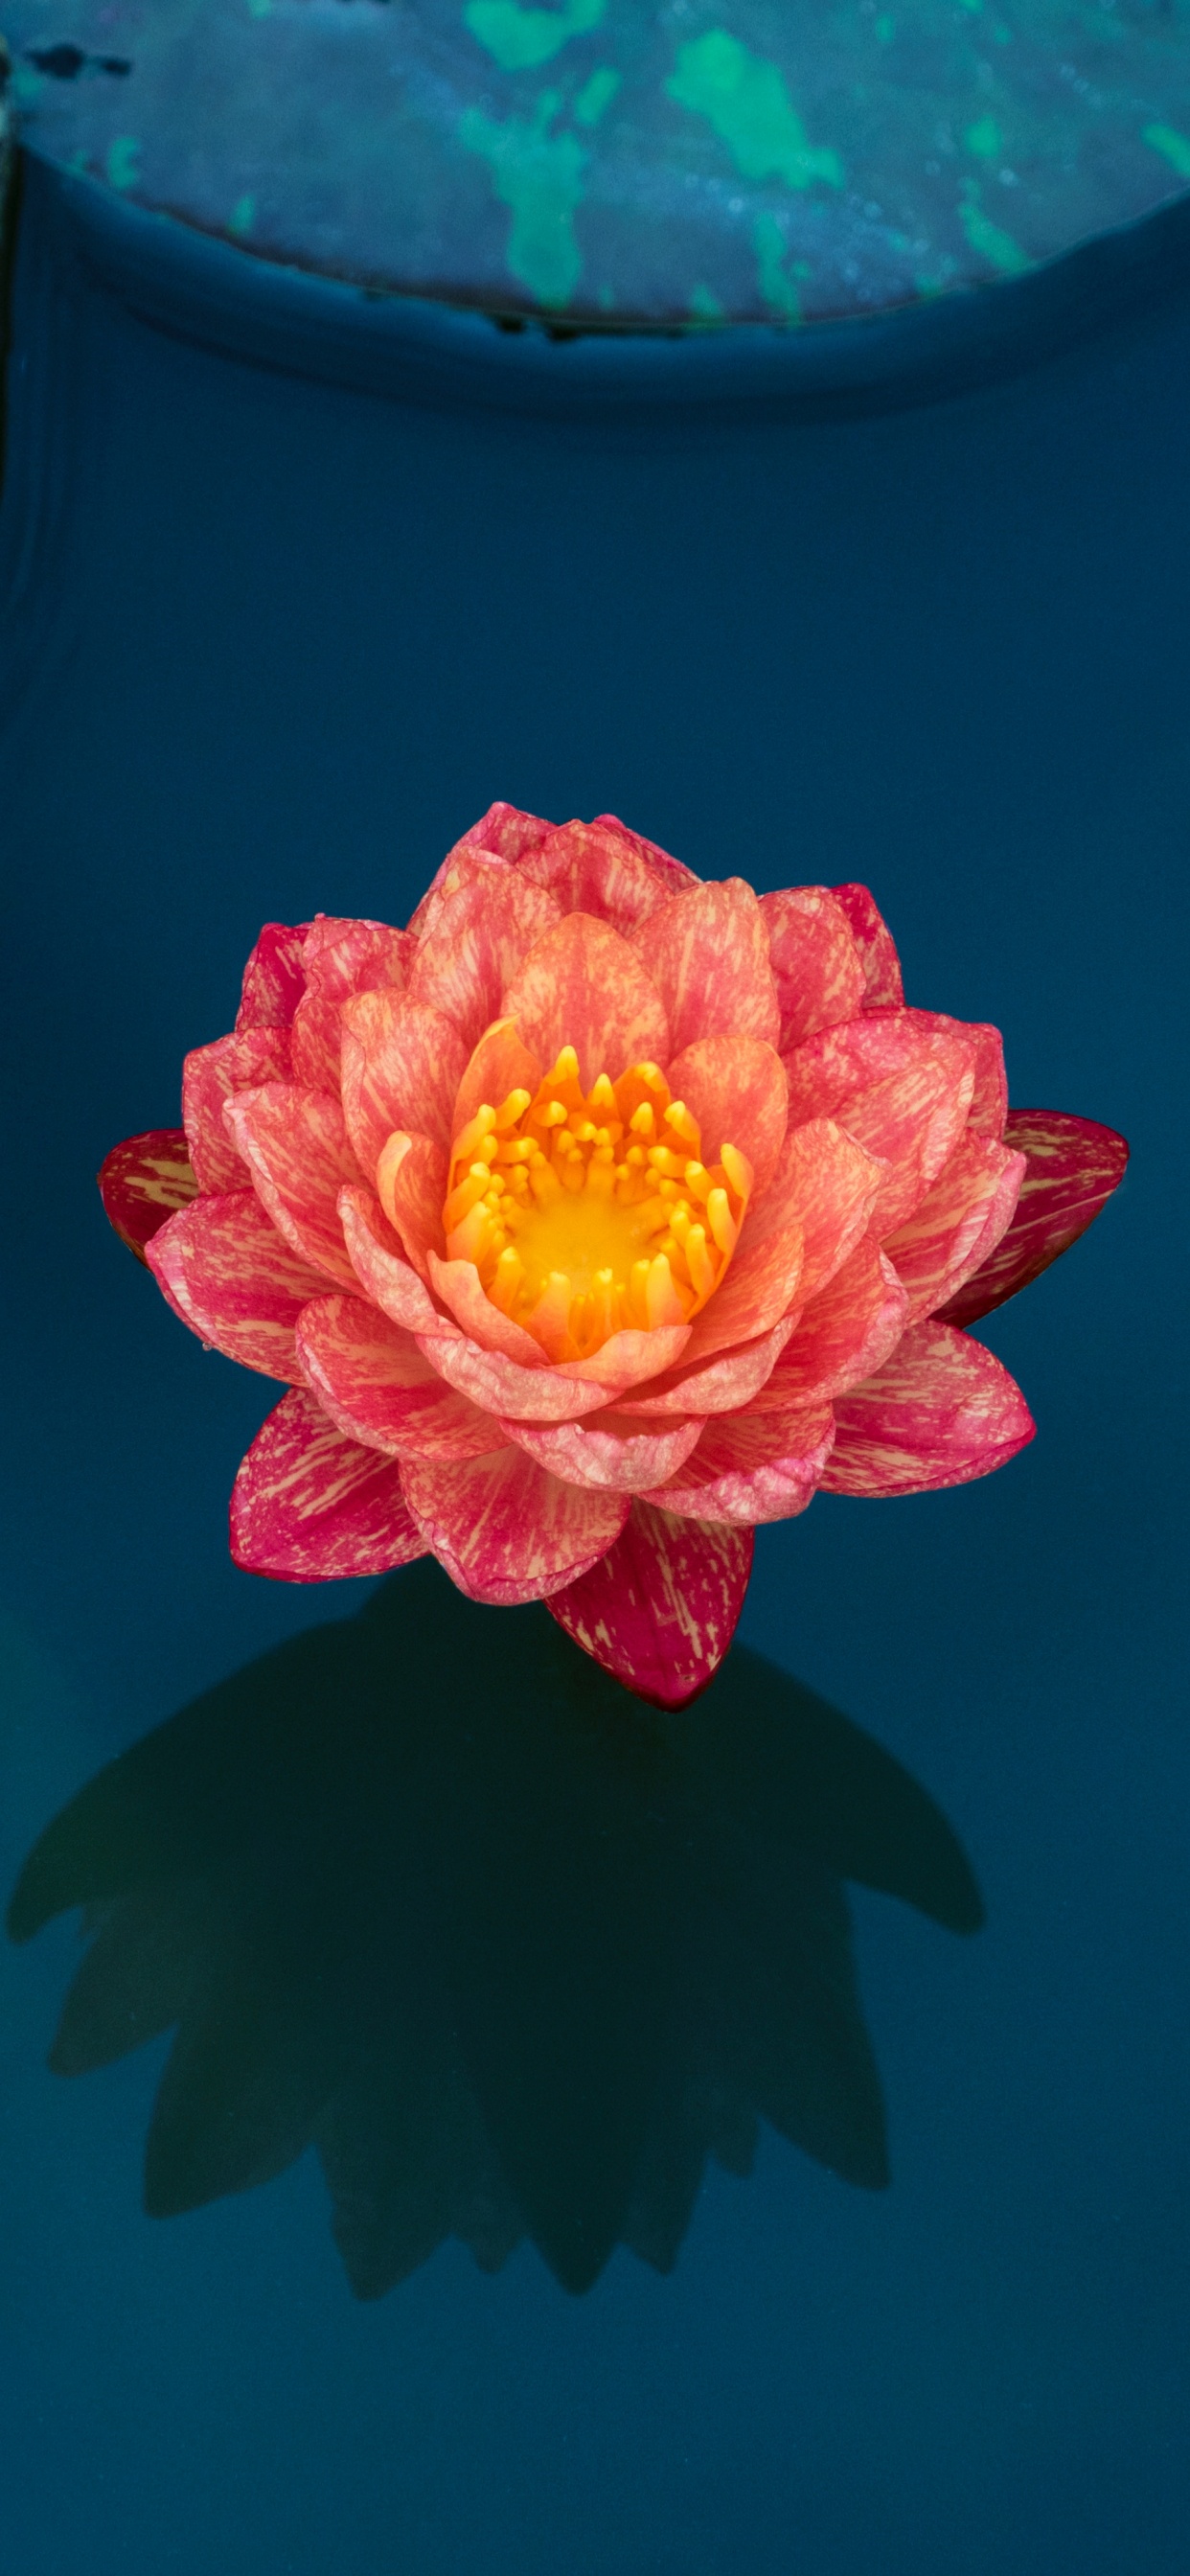 Pink and Yellow Flower on Red Surface. Wallpaper in 1242x2688 Resolution